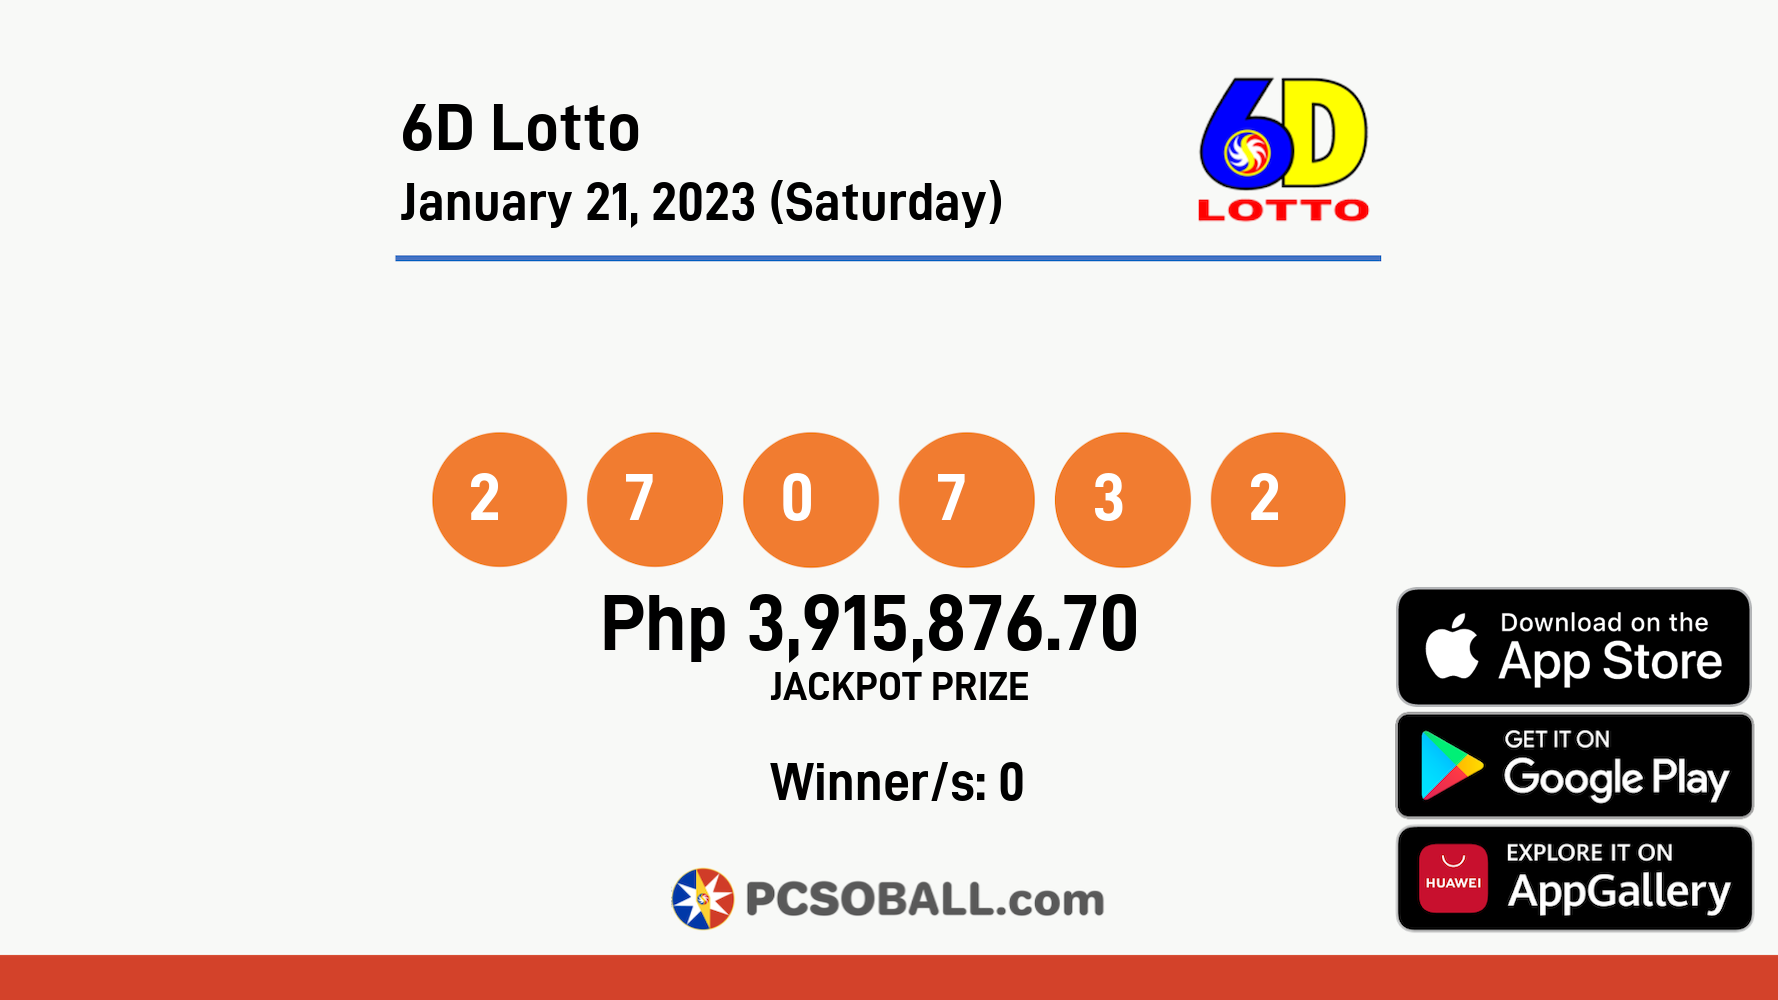 6D Lotto January 21, 2023 (Saturday) Result